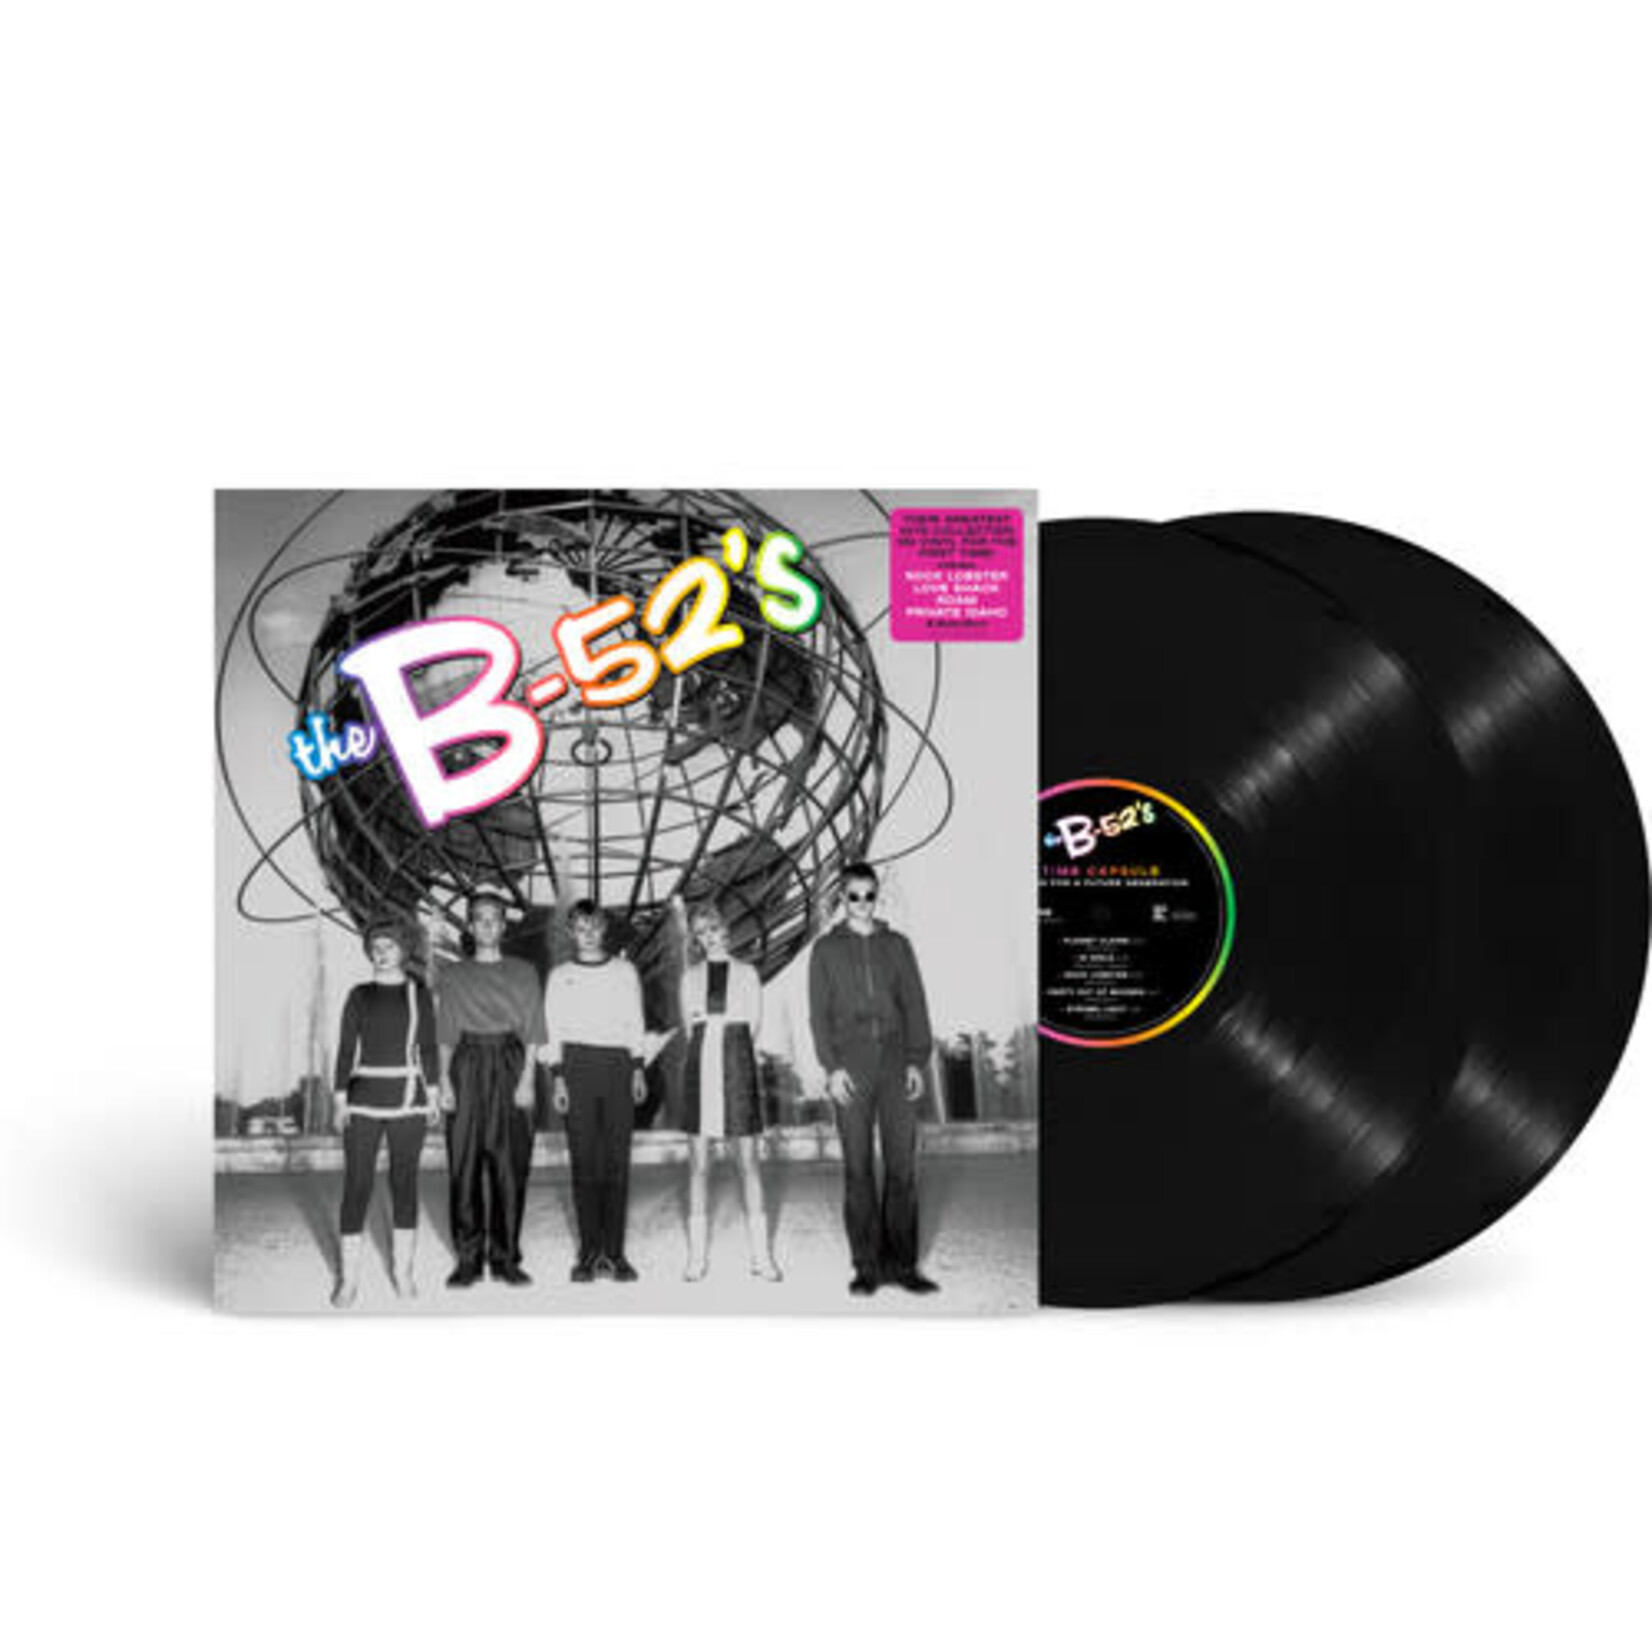 B-52s - Time Capsule: Songs For A Future Generation (2LP)